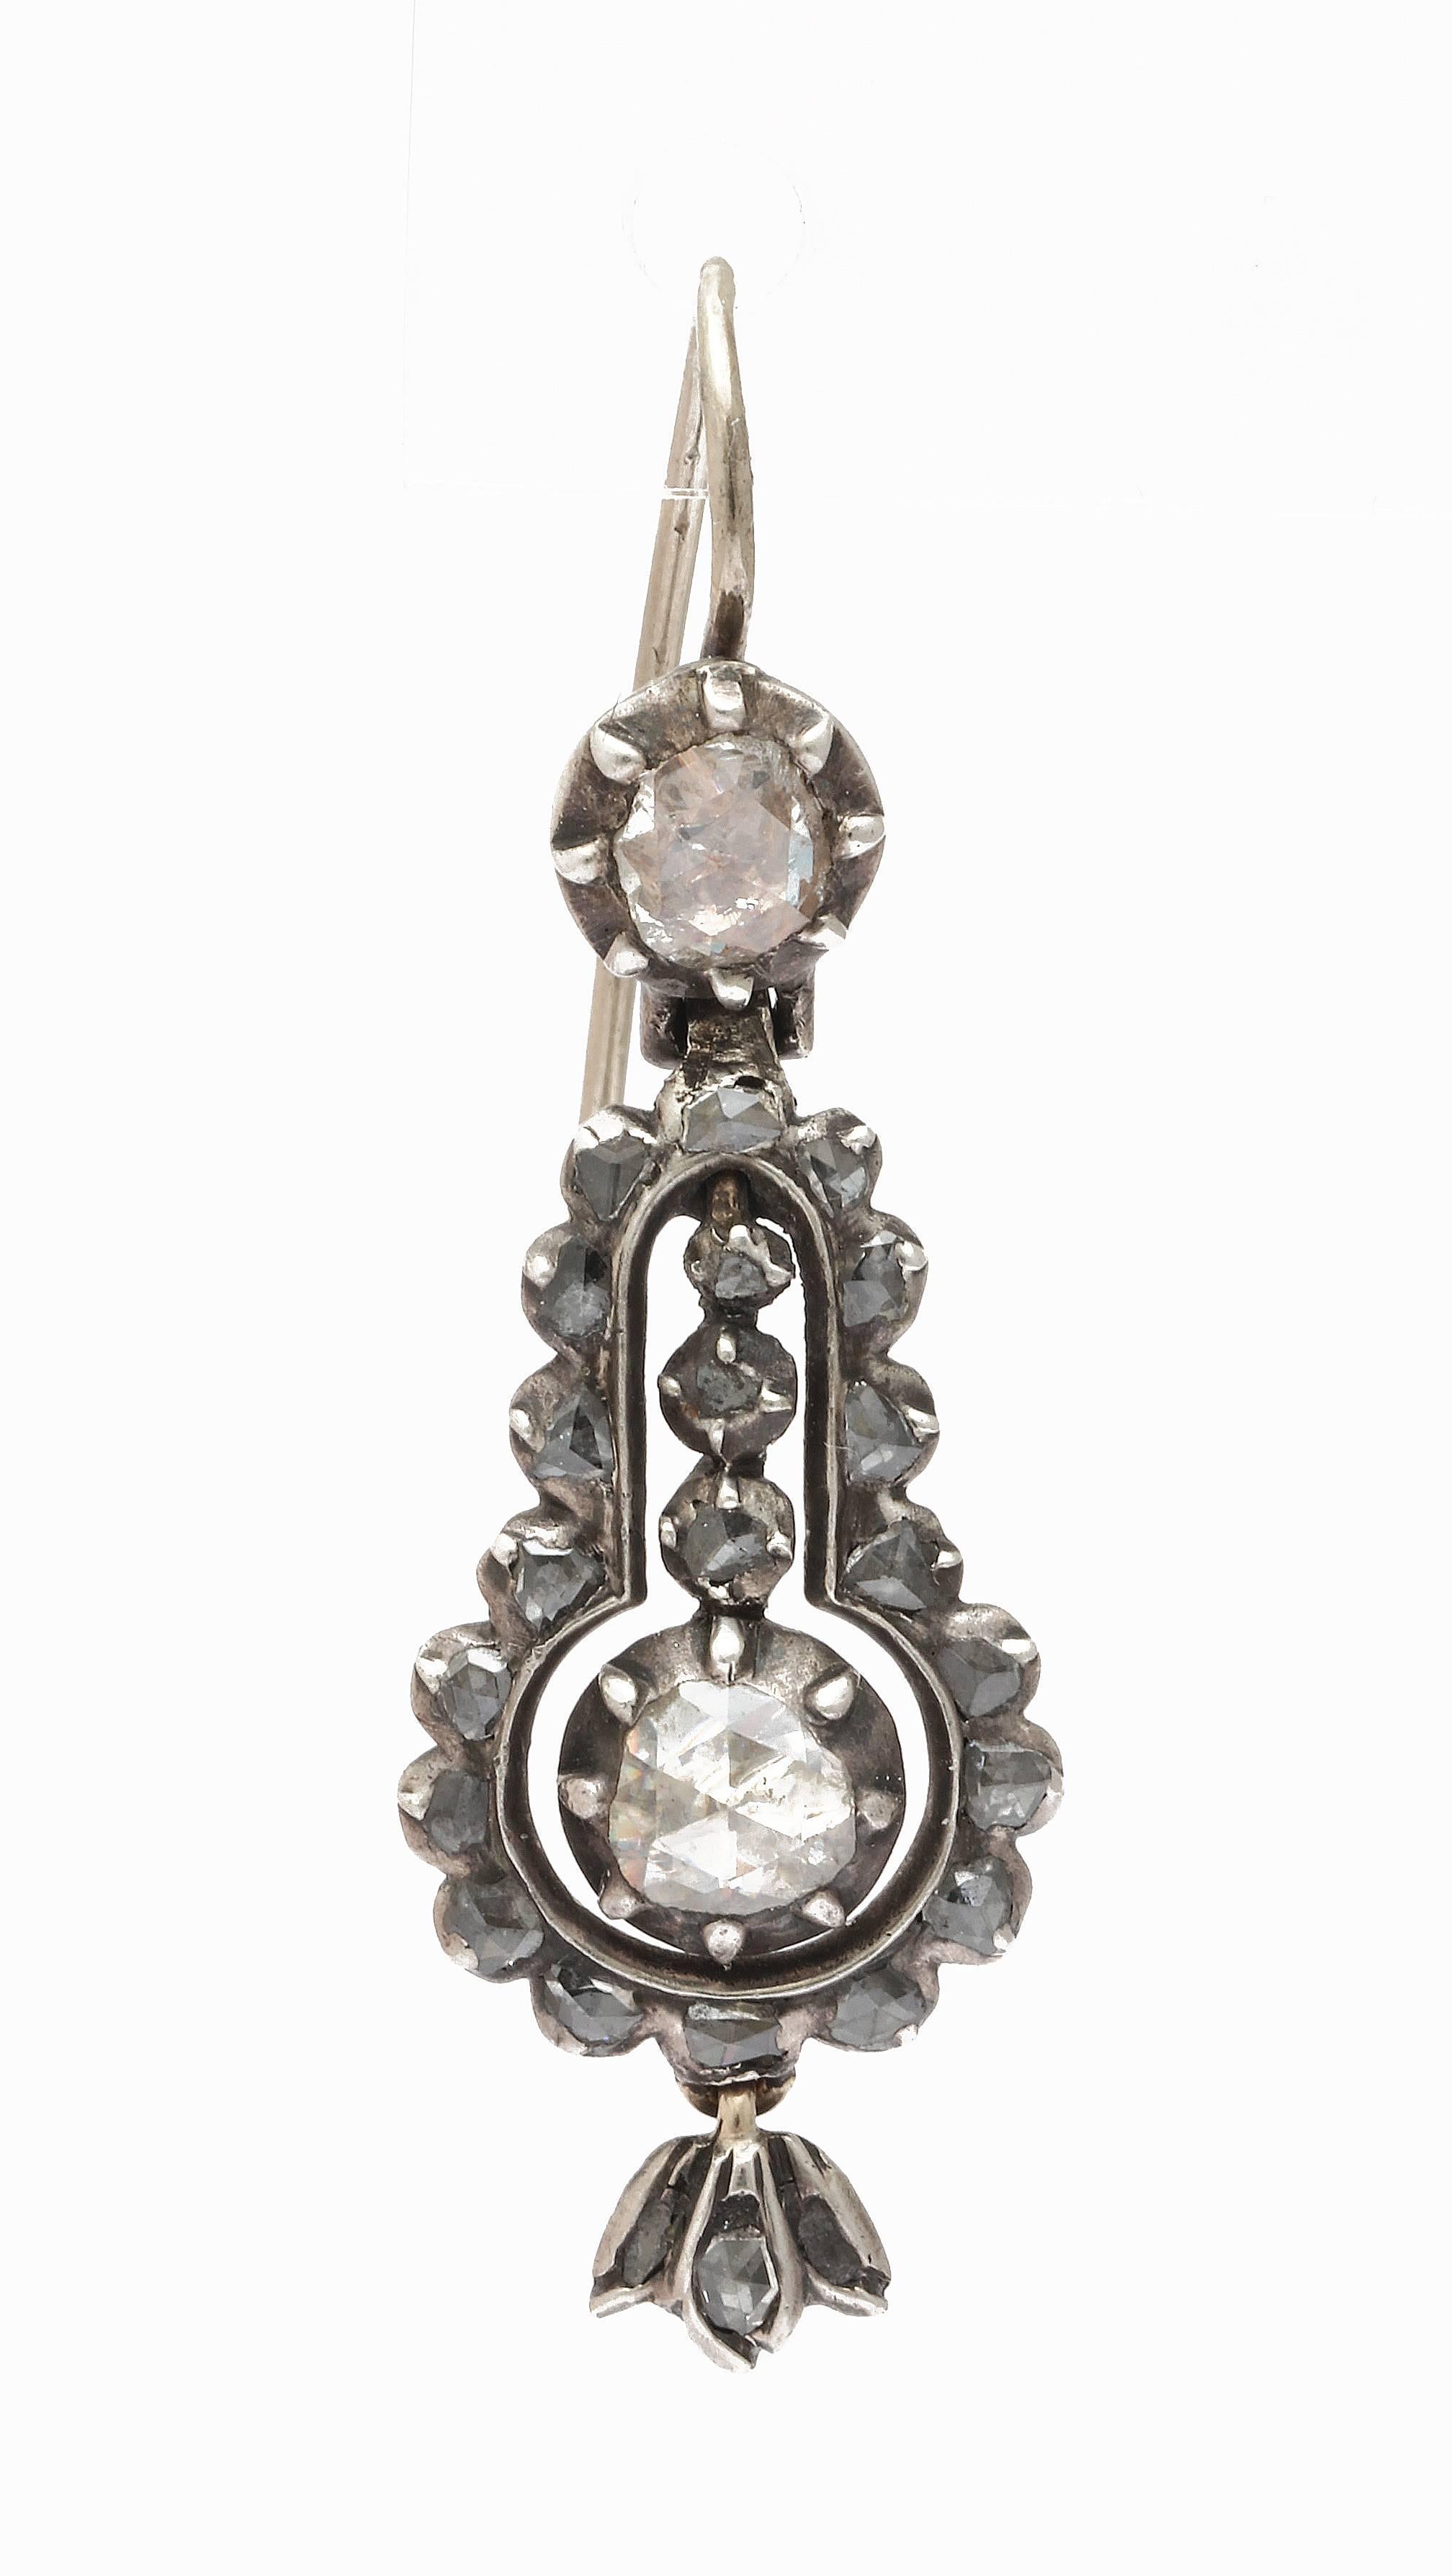 Georgian diamond earrings in the form of lyre flicker in their closed back settings. Tiny floral buds are suspended at bottom. The diamonds are set in silver and 15 Kt gold in the Georgian manner.  They are fine and multi faceted rose cuts. The